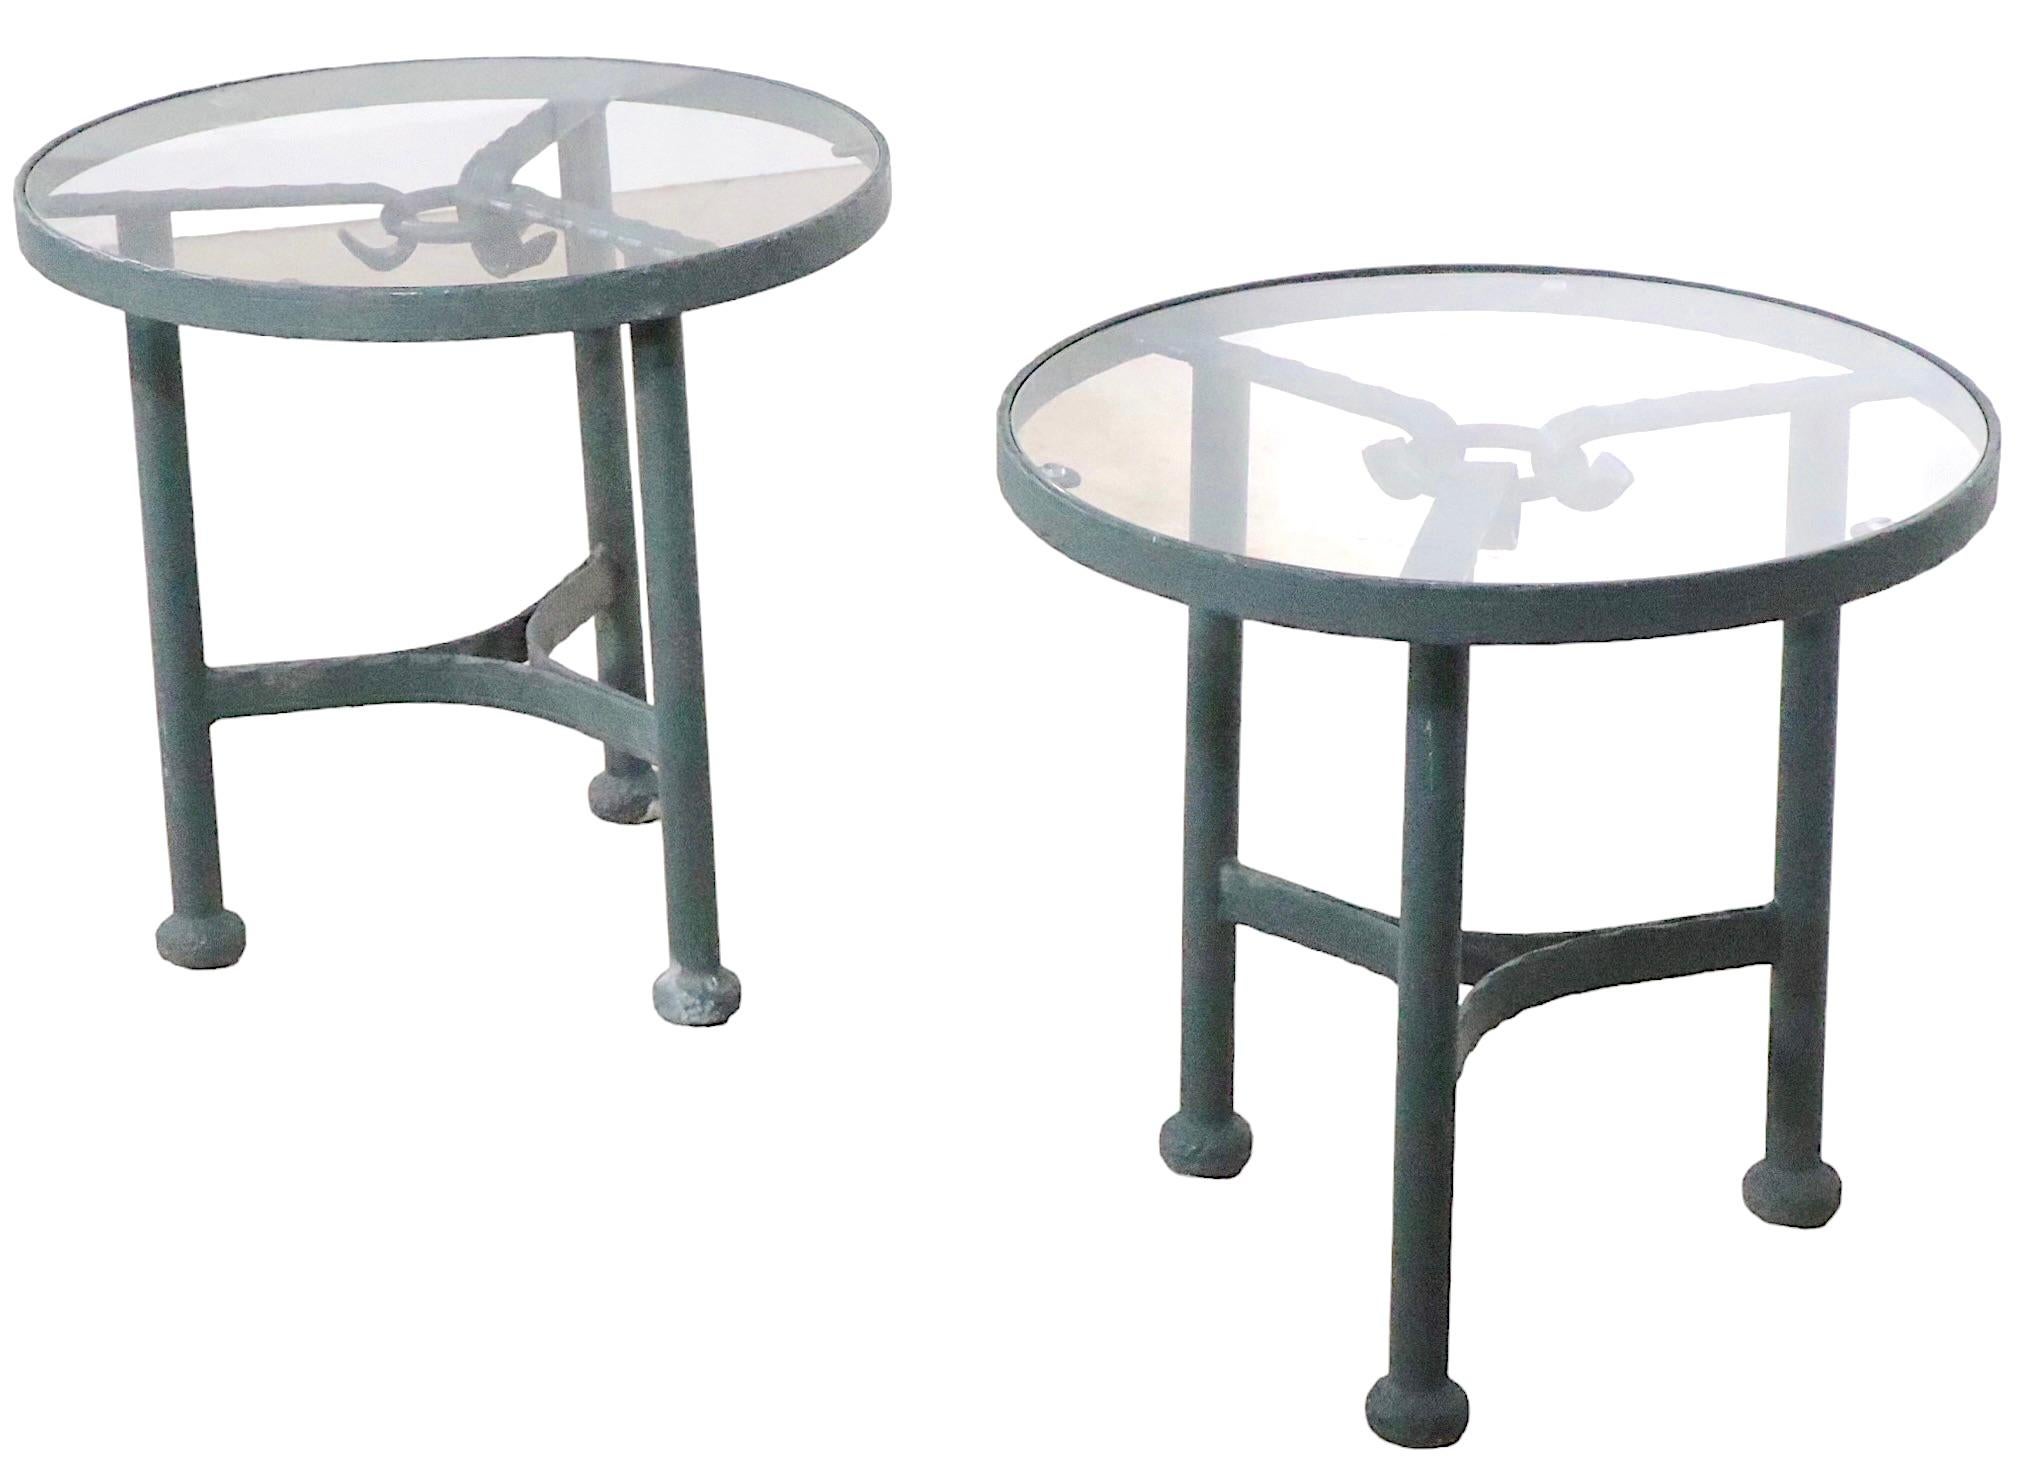 20th Century Pr. Faux Verdigris Metal and Glass Garden Patio Side Tables after Giacometti 